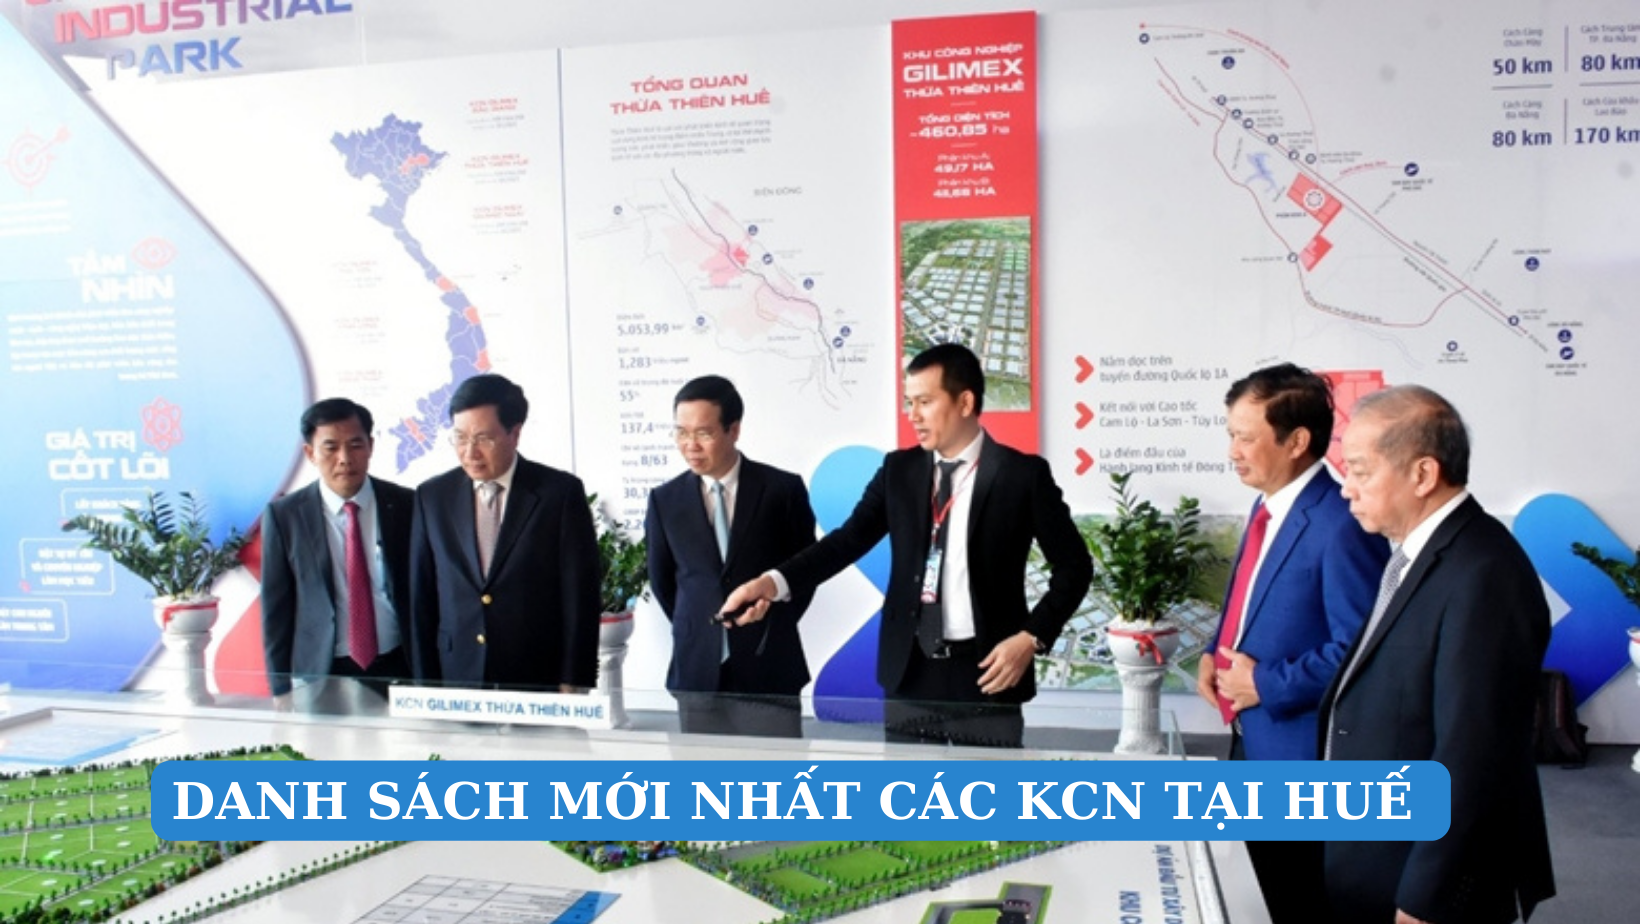 LIST OF 22 INDUSTRIAL PARKS AND CLUSTERS IN HUE PROVINCE